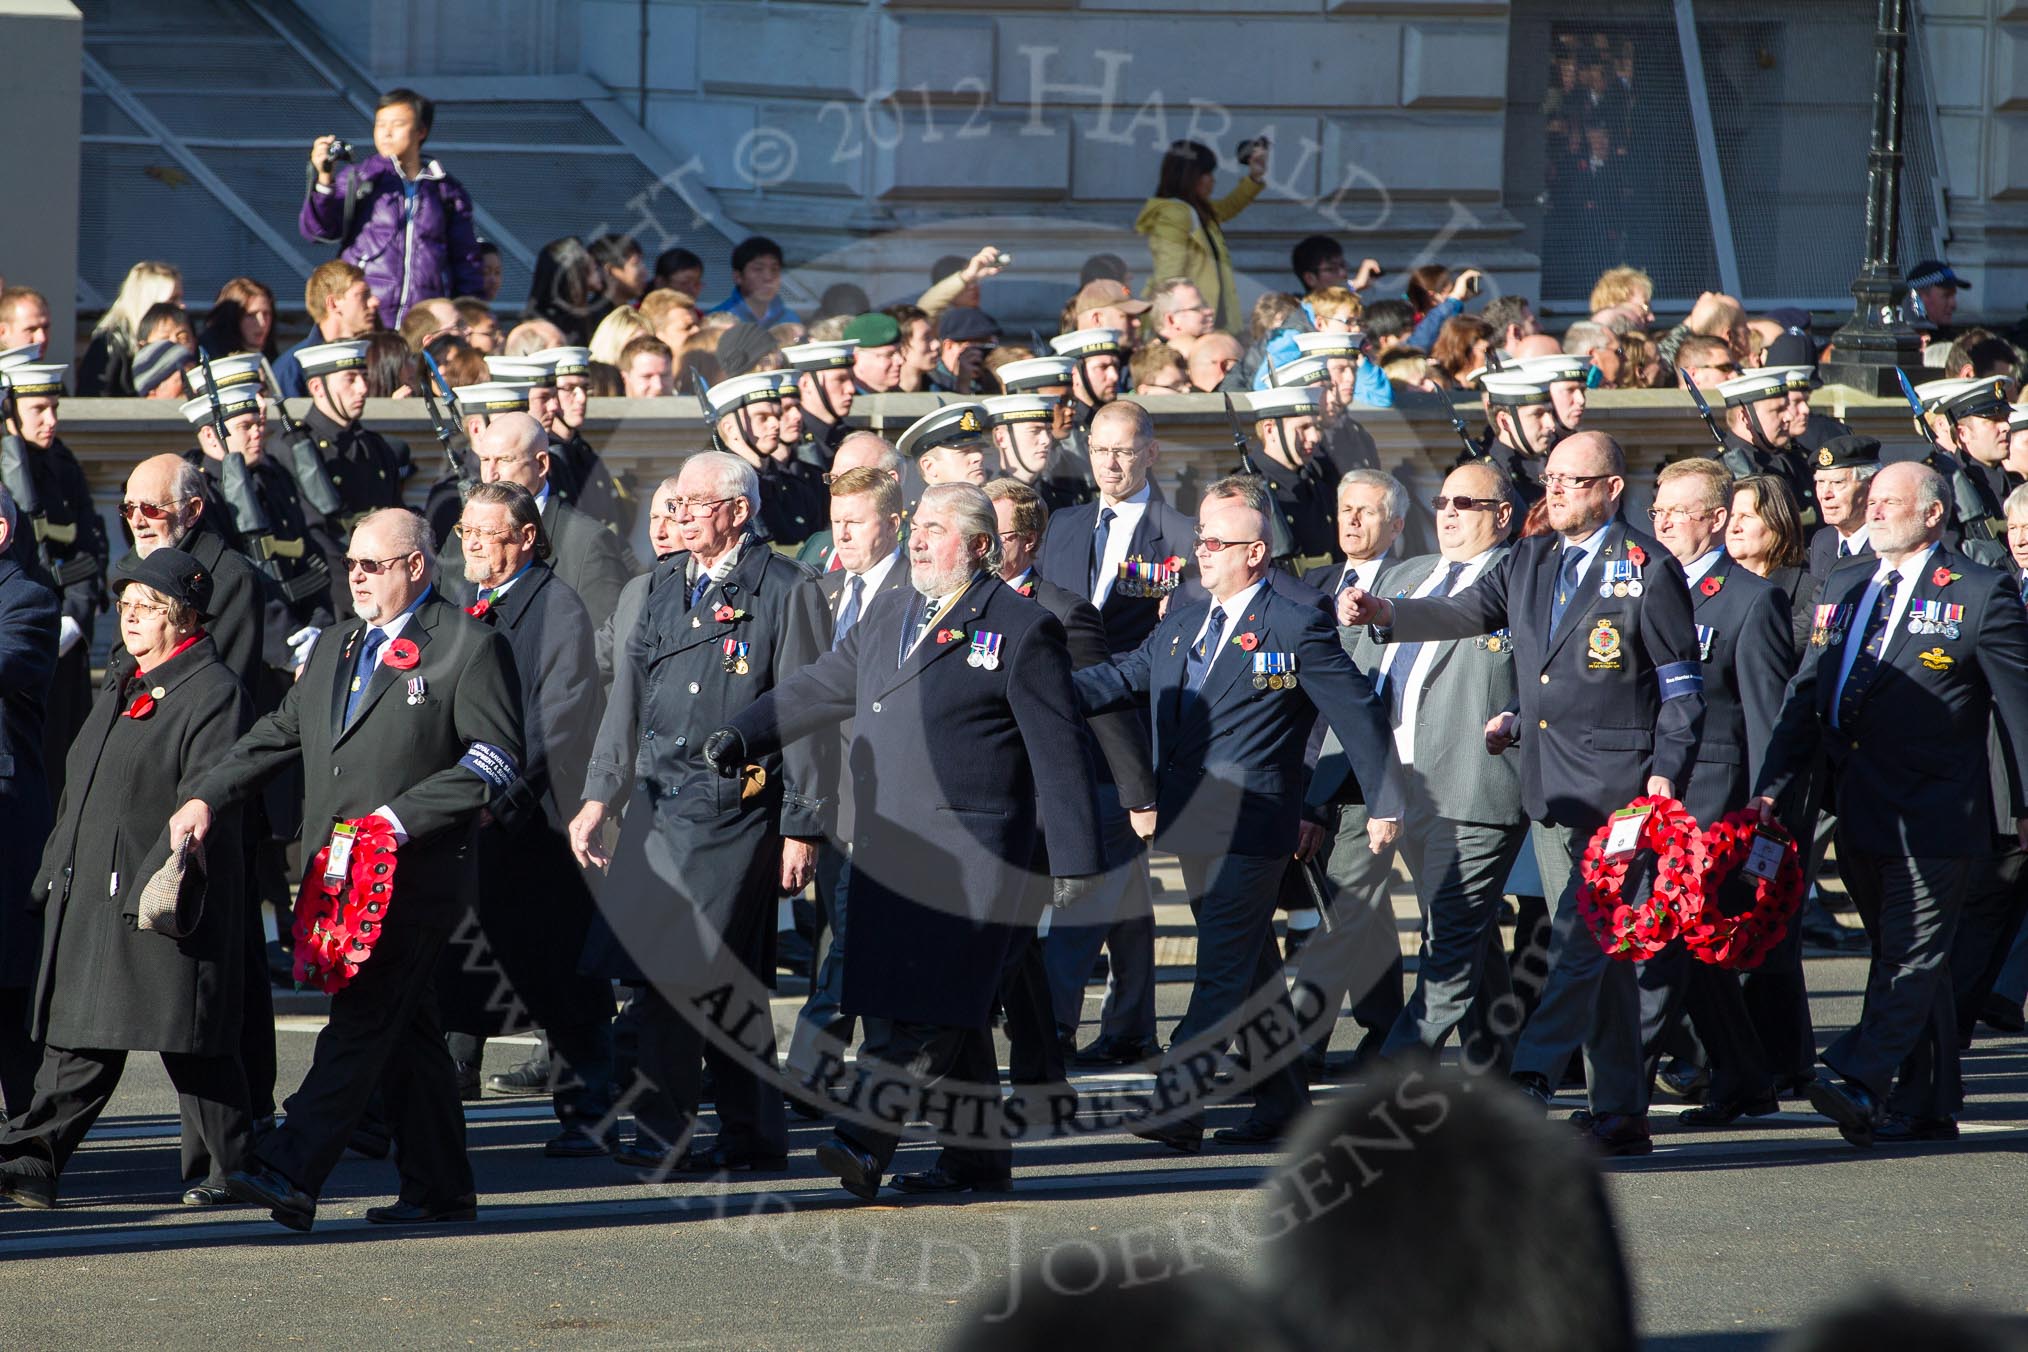 Remembrance Sunday 2012 Cenotaph March Past: Group E14 - Fleet Air Arm Safety Equipment & Survival Association, and E15 - Sea Harrier Association..
Whitehall, Cenotaph,
London SW1,

United Kingdom,
on 11 November 2012 at 11:40, image #116